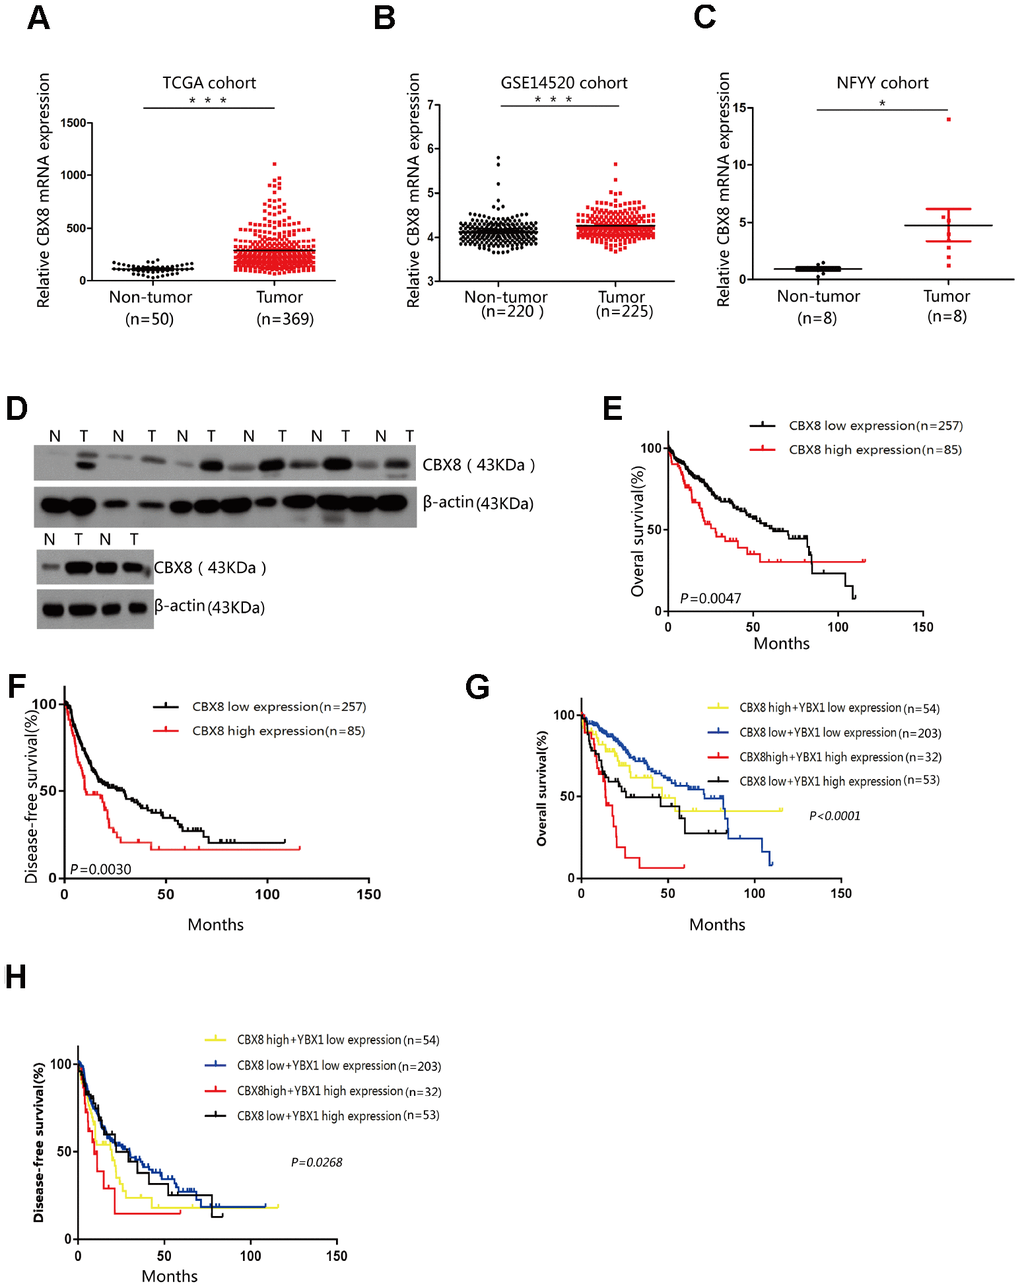 CBX8 expression is up-regulated in HCC and is correlated with poor prognosis. (A–B) Expression of CBX8 in the TCGA and GSE14520 cohorts (P C) Expression levels of CBX8 in HCC tissues and adjacent non-tumor tissues (NFYY cohort) as measured by qRT-PCR analysis (P D) The protein expression of CBX8 in 8 HCC samples was determined by western blotting. (E, F) Kaplan-Meier analysis of the overall and disease-free survival in the TCGA cohort based on CBX8 expression (G, H) Kaplan-Meier analysis of the overall and disease-free survival in the TCGA cohort based on CBX8 and YBX1 expression.